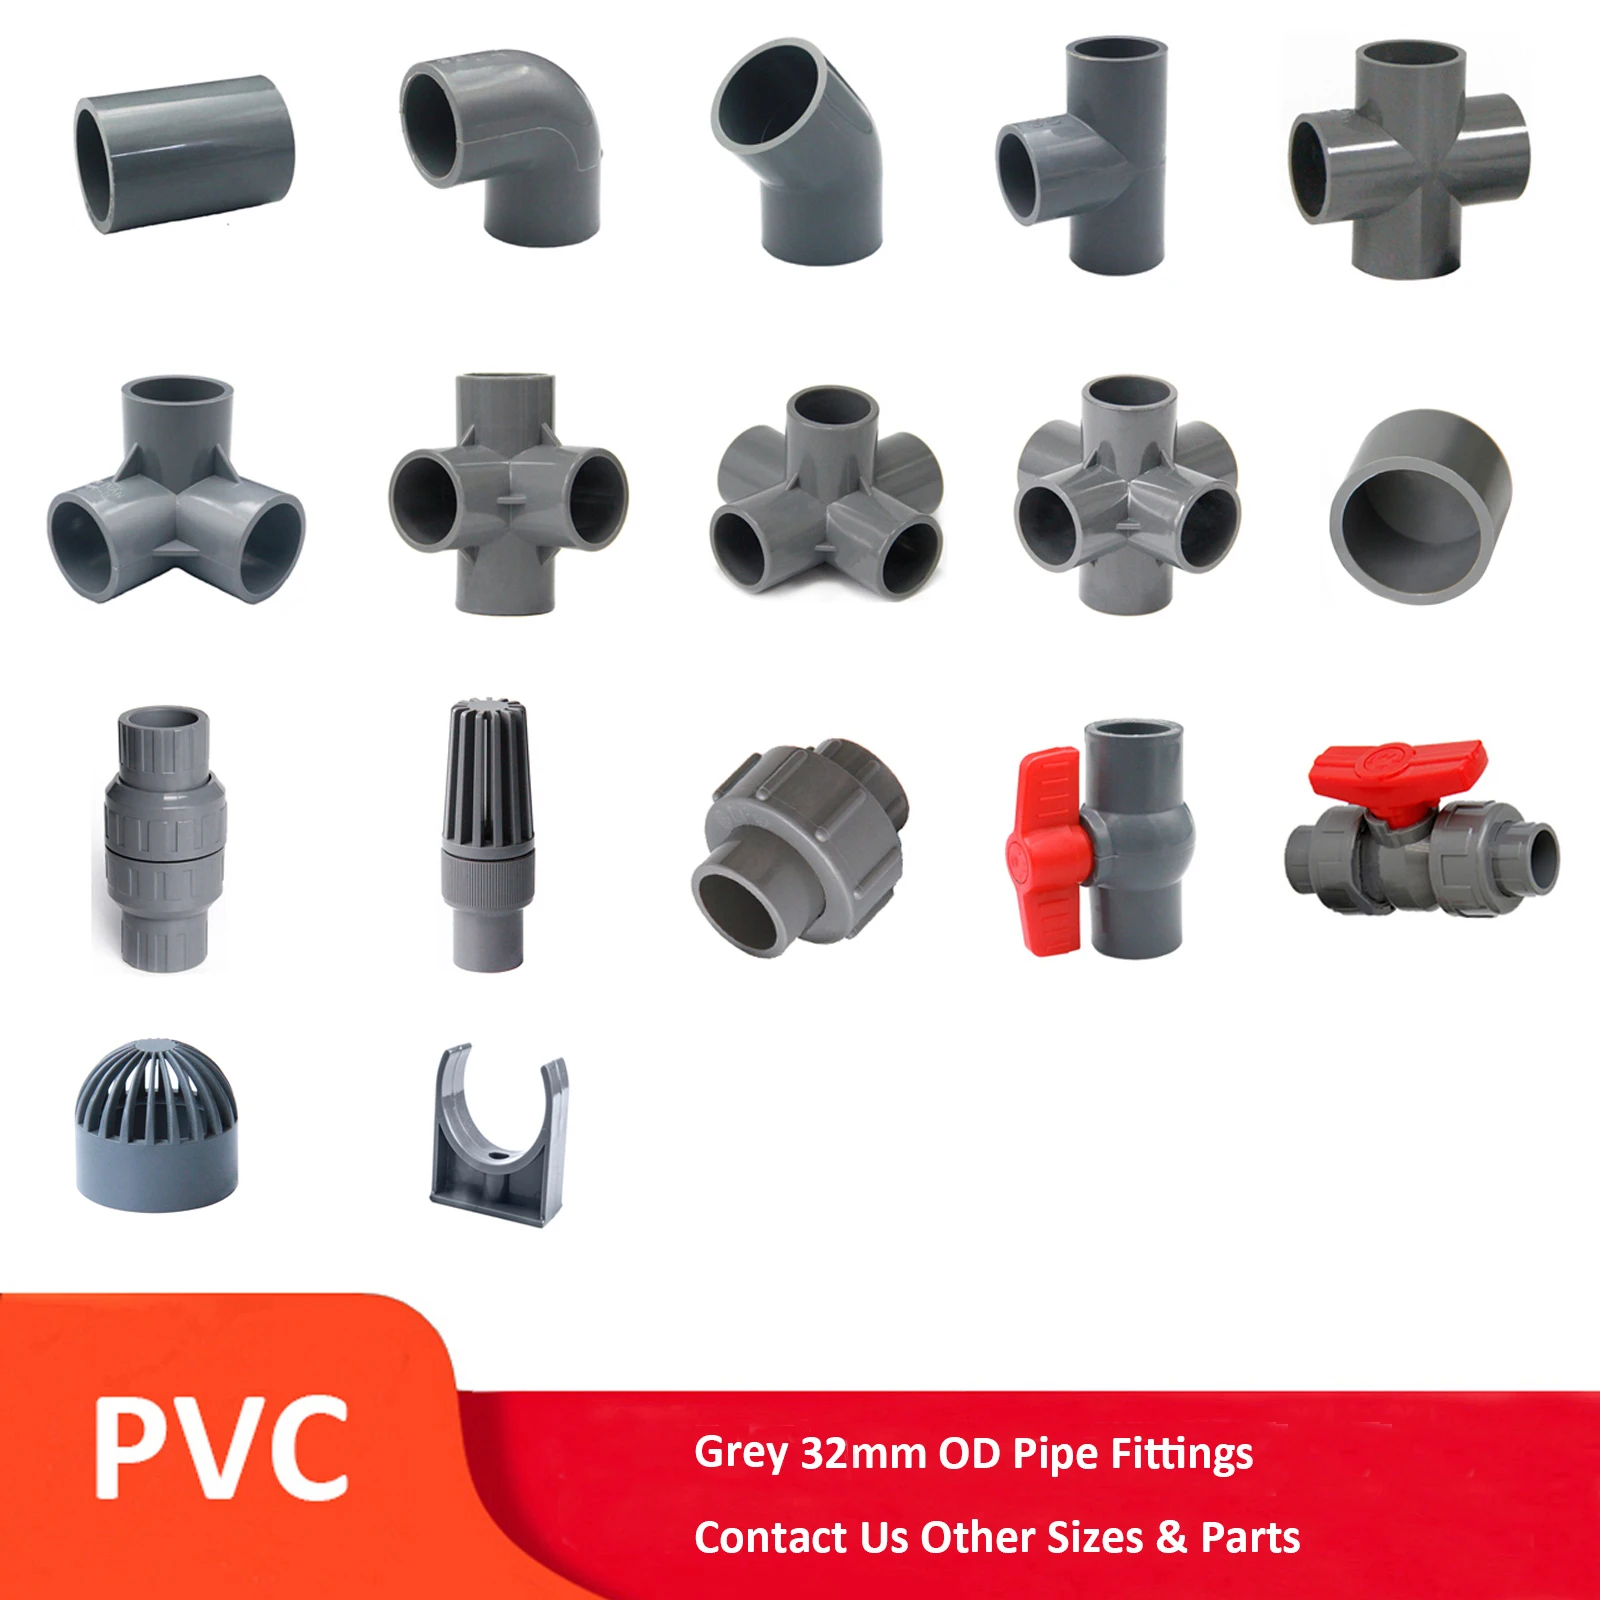 12mm 90 Degree Elbow PVC Solvent Weld Pressure Pipe Fitting Metric Sizes 250mm 